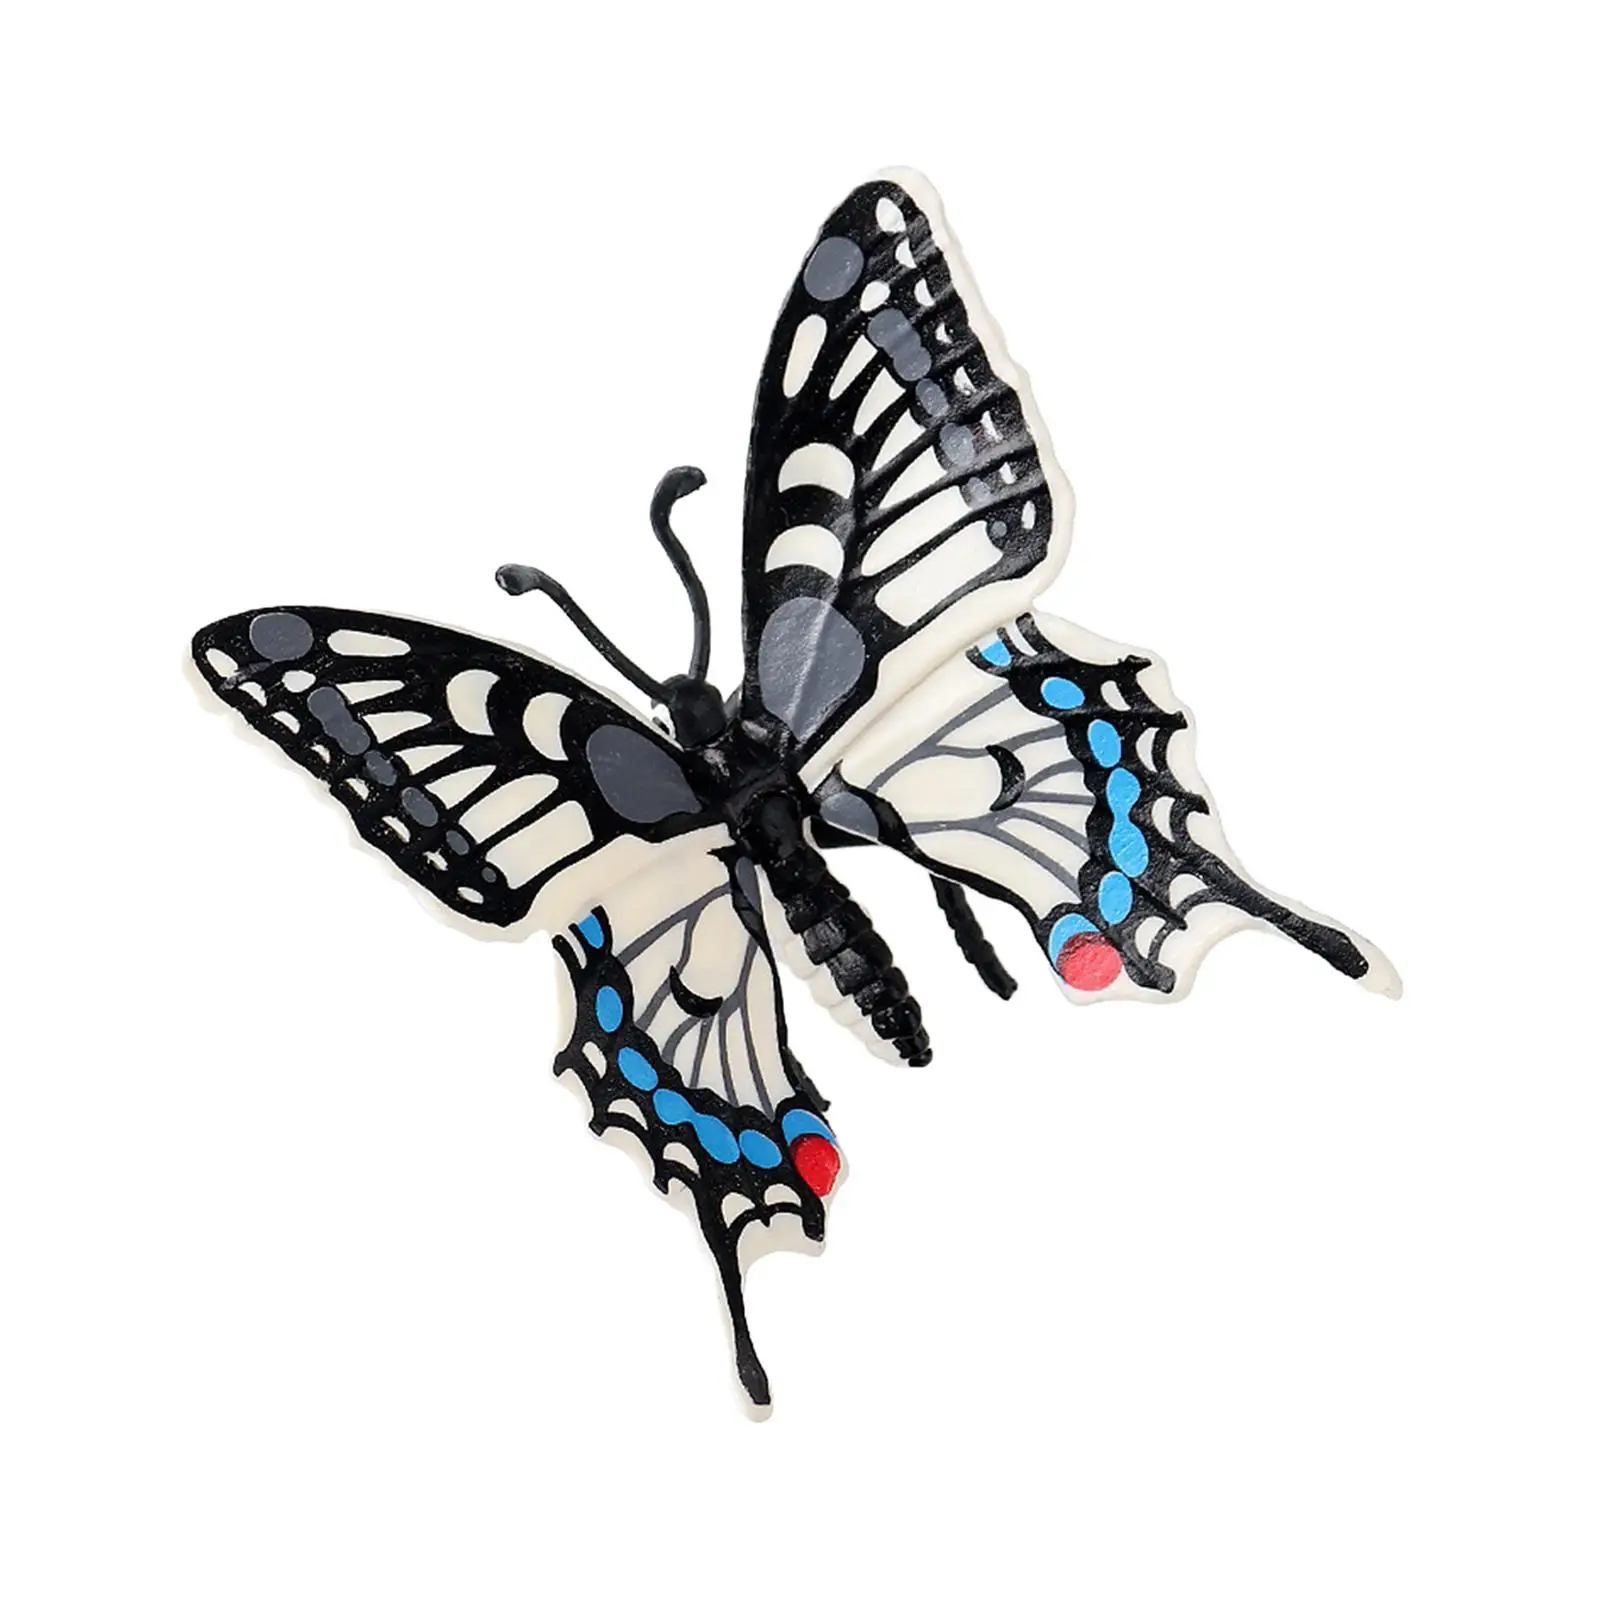 Butterfly Animal Model Science Animals Learning for Party Decoration Bath Toys Cake Toppers Party Favors DIY Landscaping